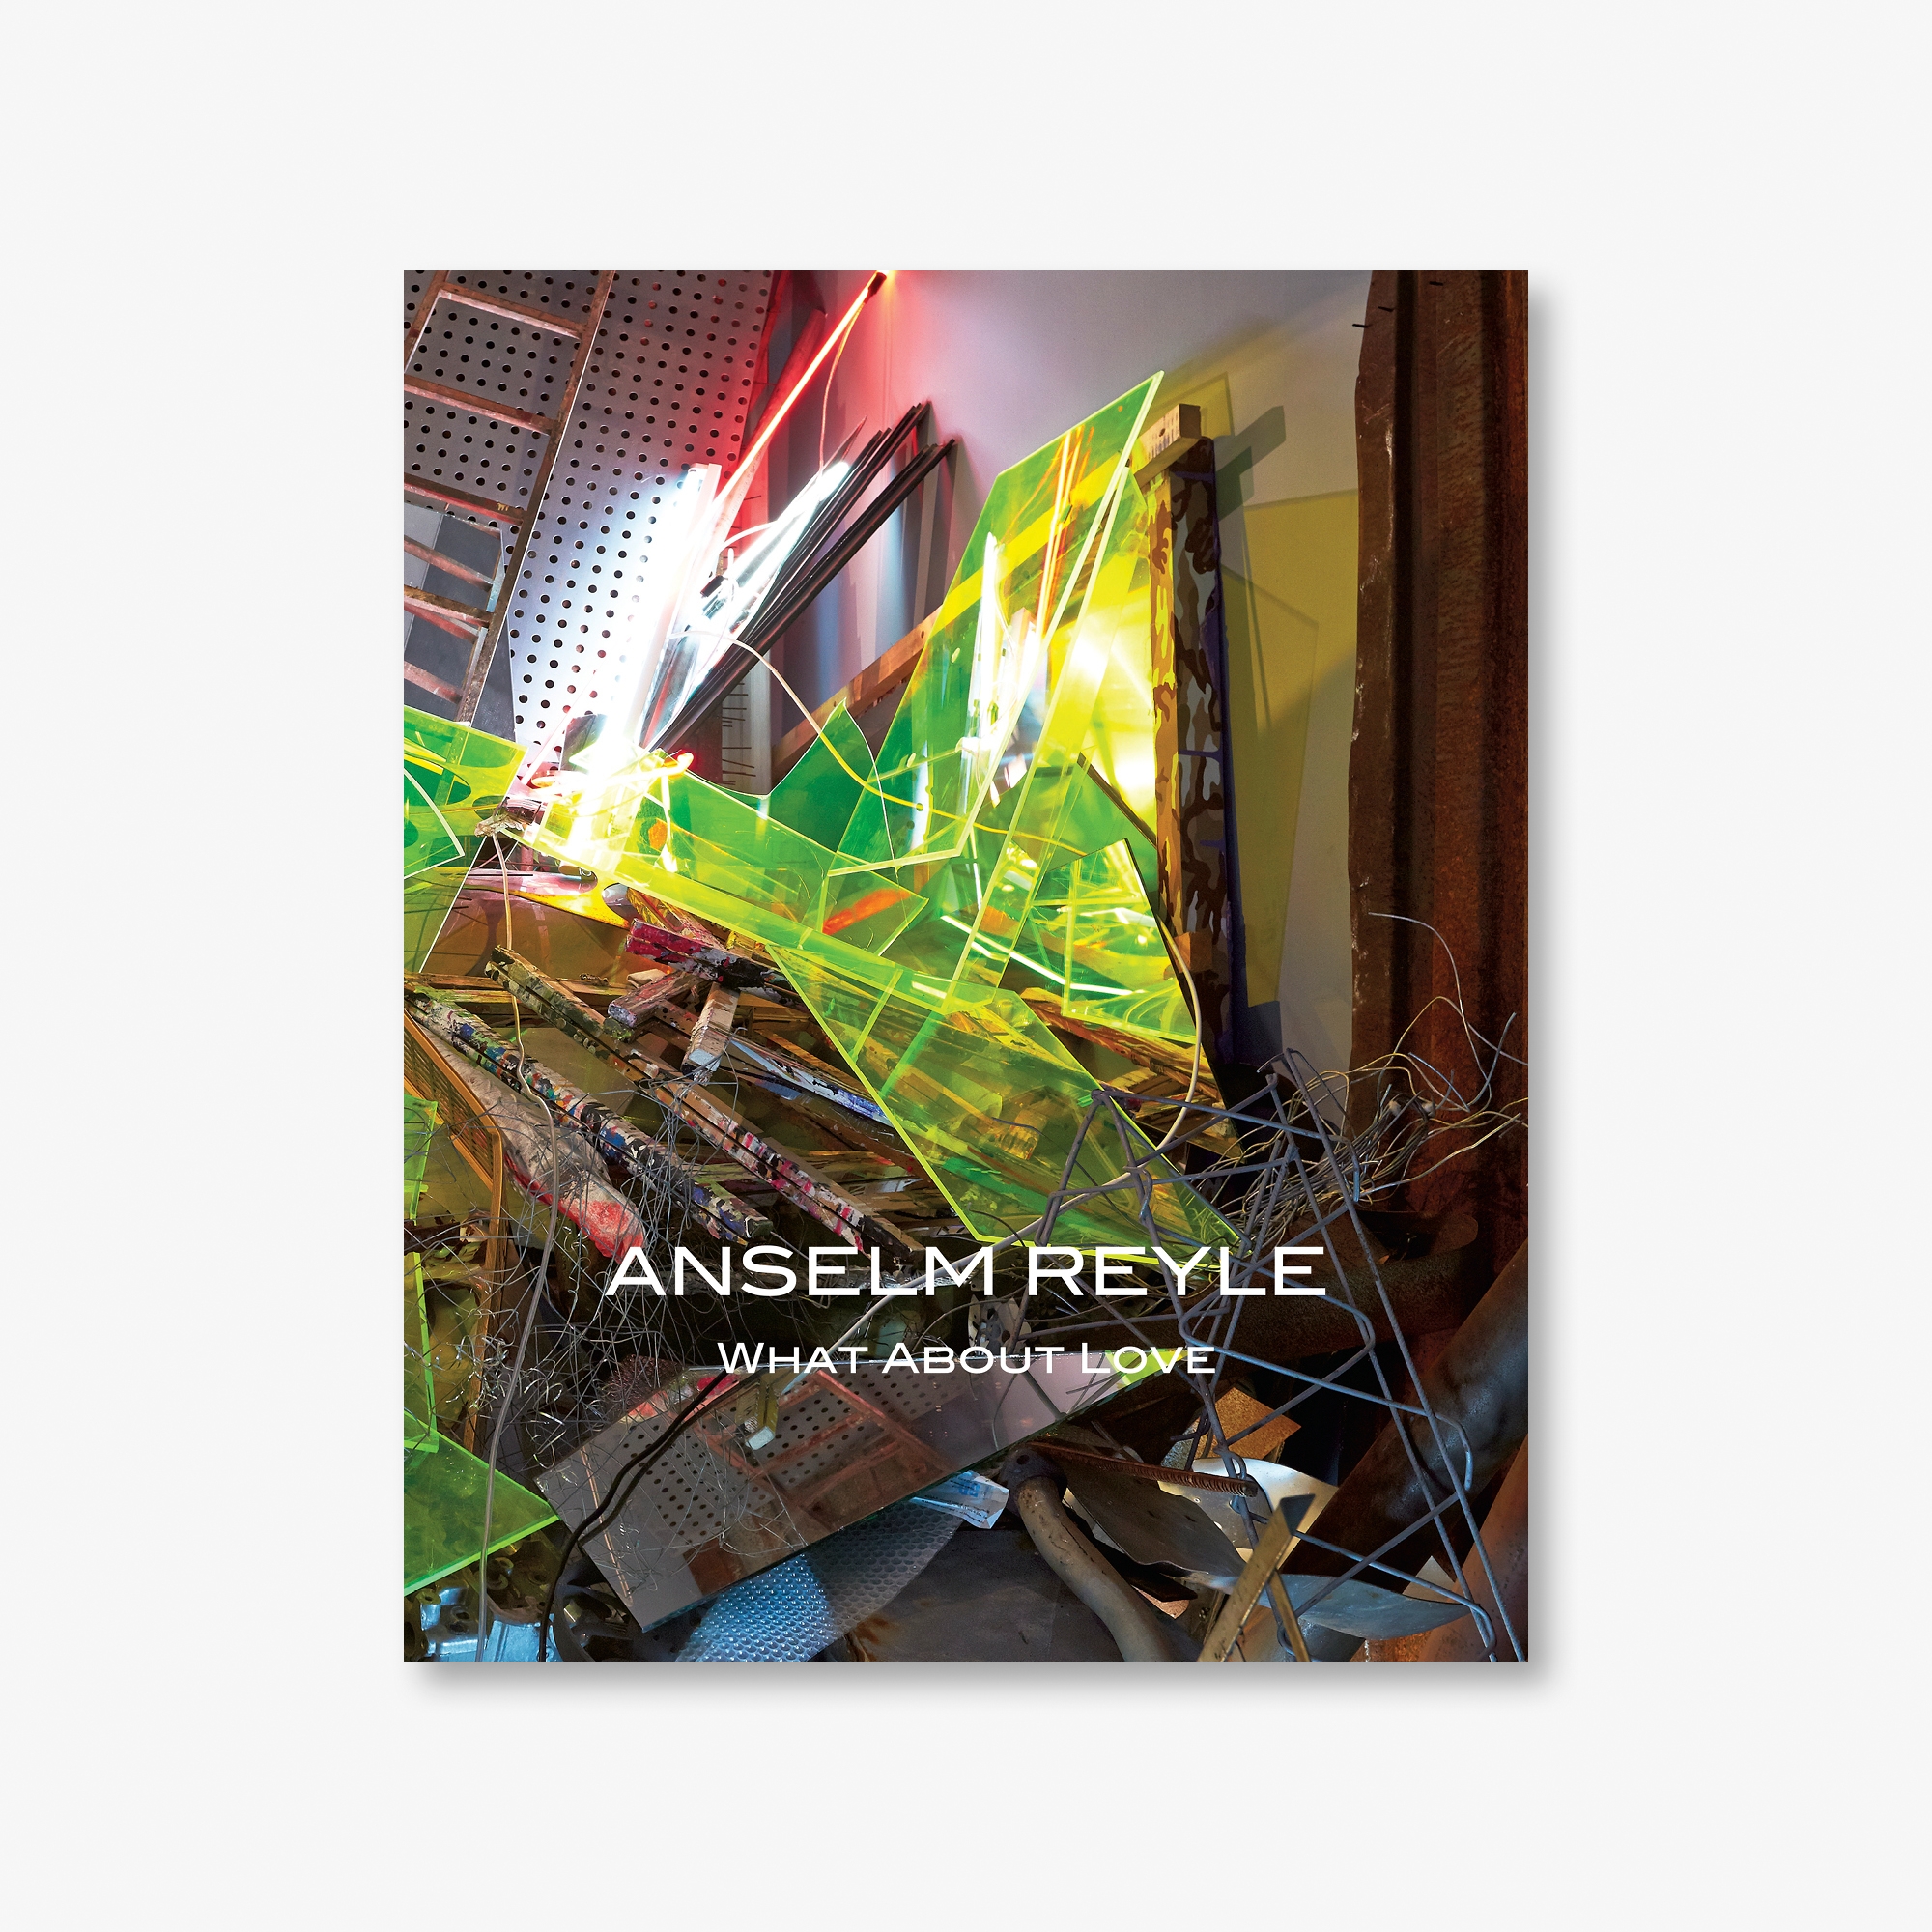 ANSELM REYLE : WHAT ABOUT LOVE